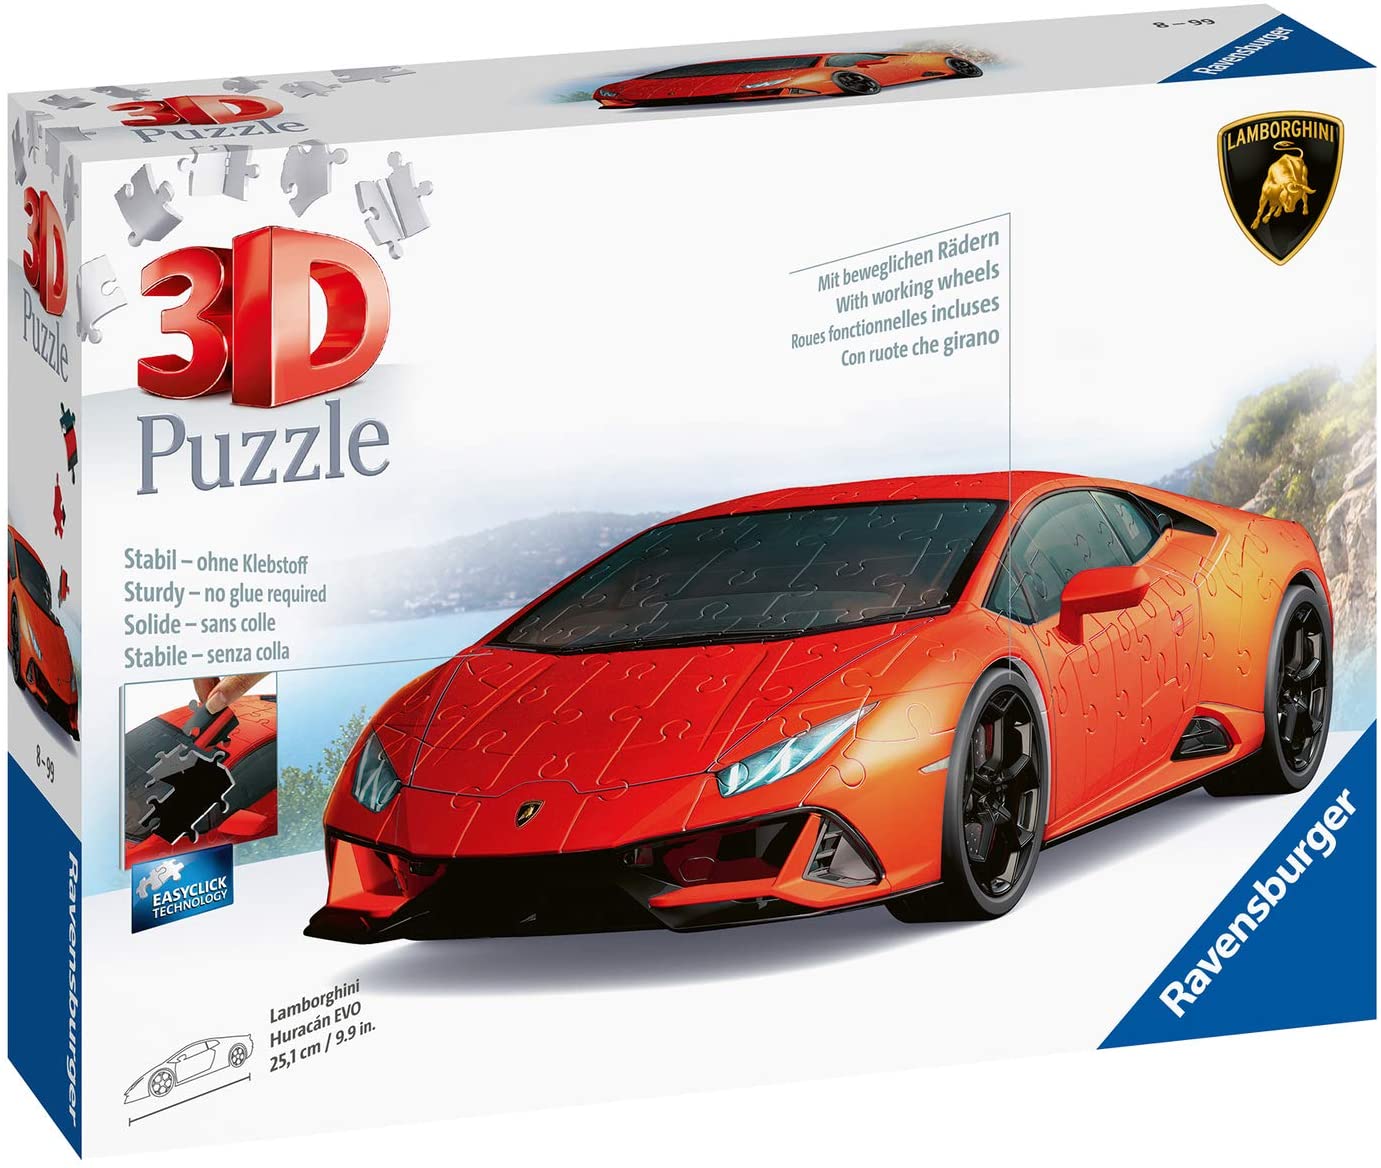 Ravensburger Lamborghini Huracan Evo 140 Piece 3D Puzzle for Families and Adults